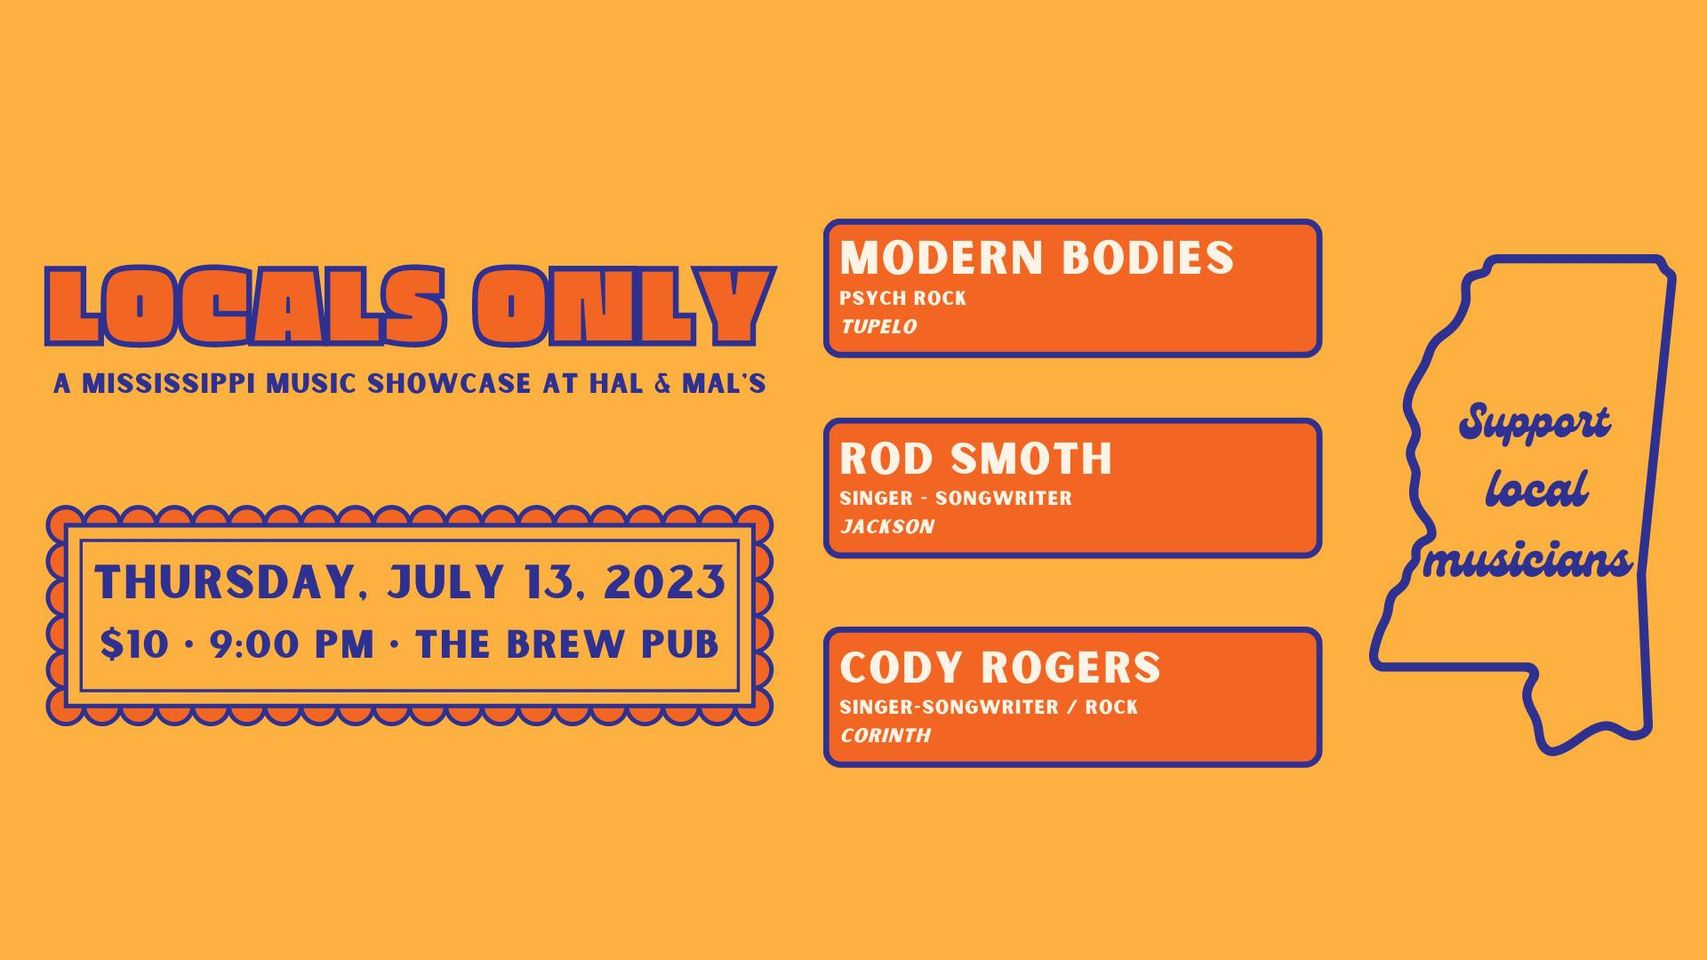 Locals Only w/ Modern Bodies, Rod Smoth, + Cody Rogers at Hal & Mal’s